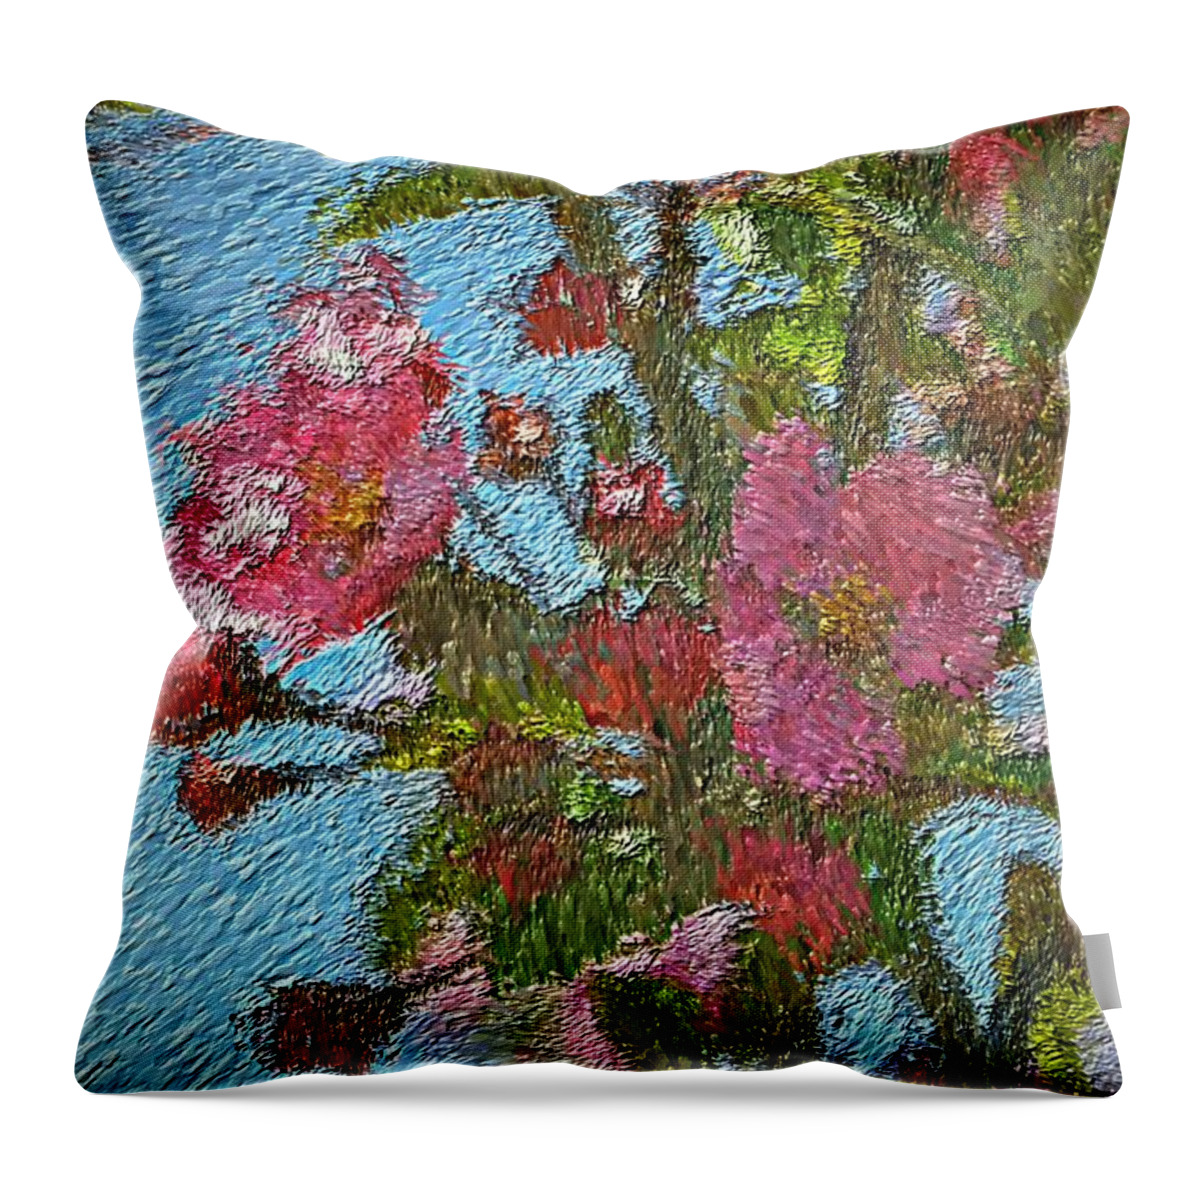 Abstract Throw Pillow featuring the photograph What Love Is This by Lisa Holland-Gillem